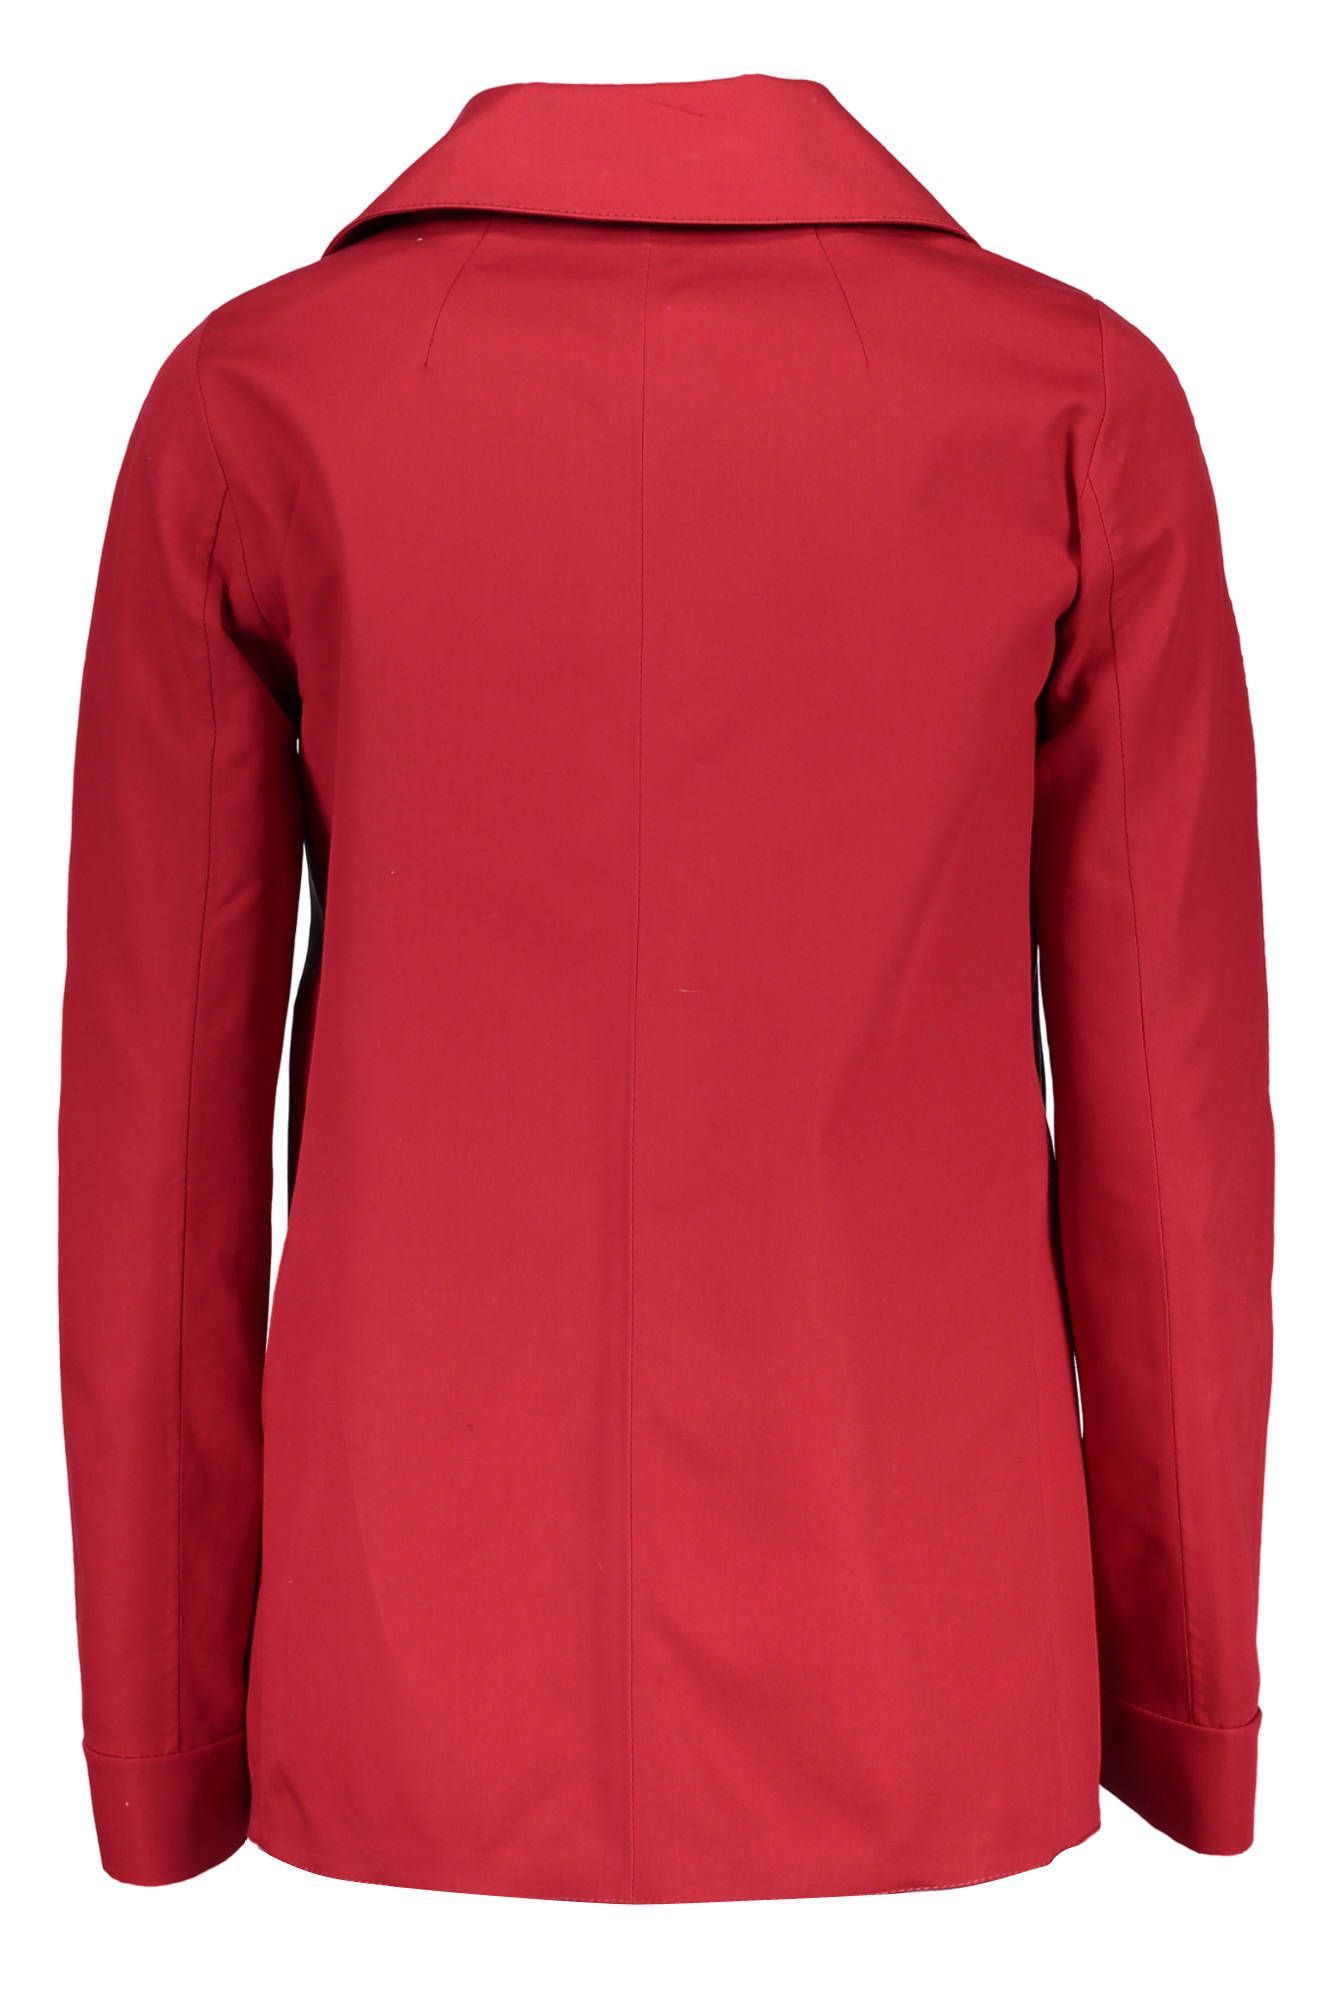 Chic Red Cotton Sports Jacket